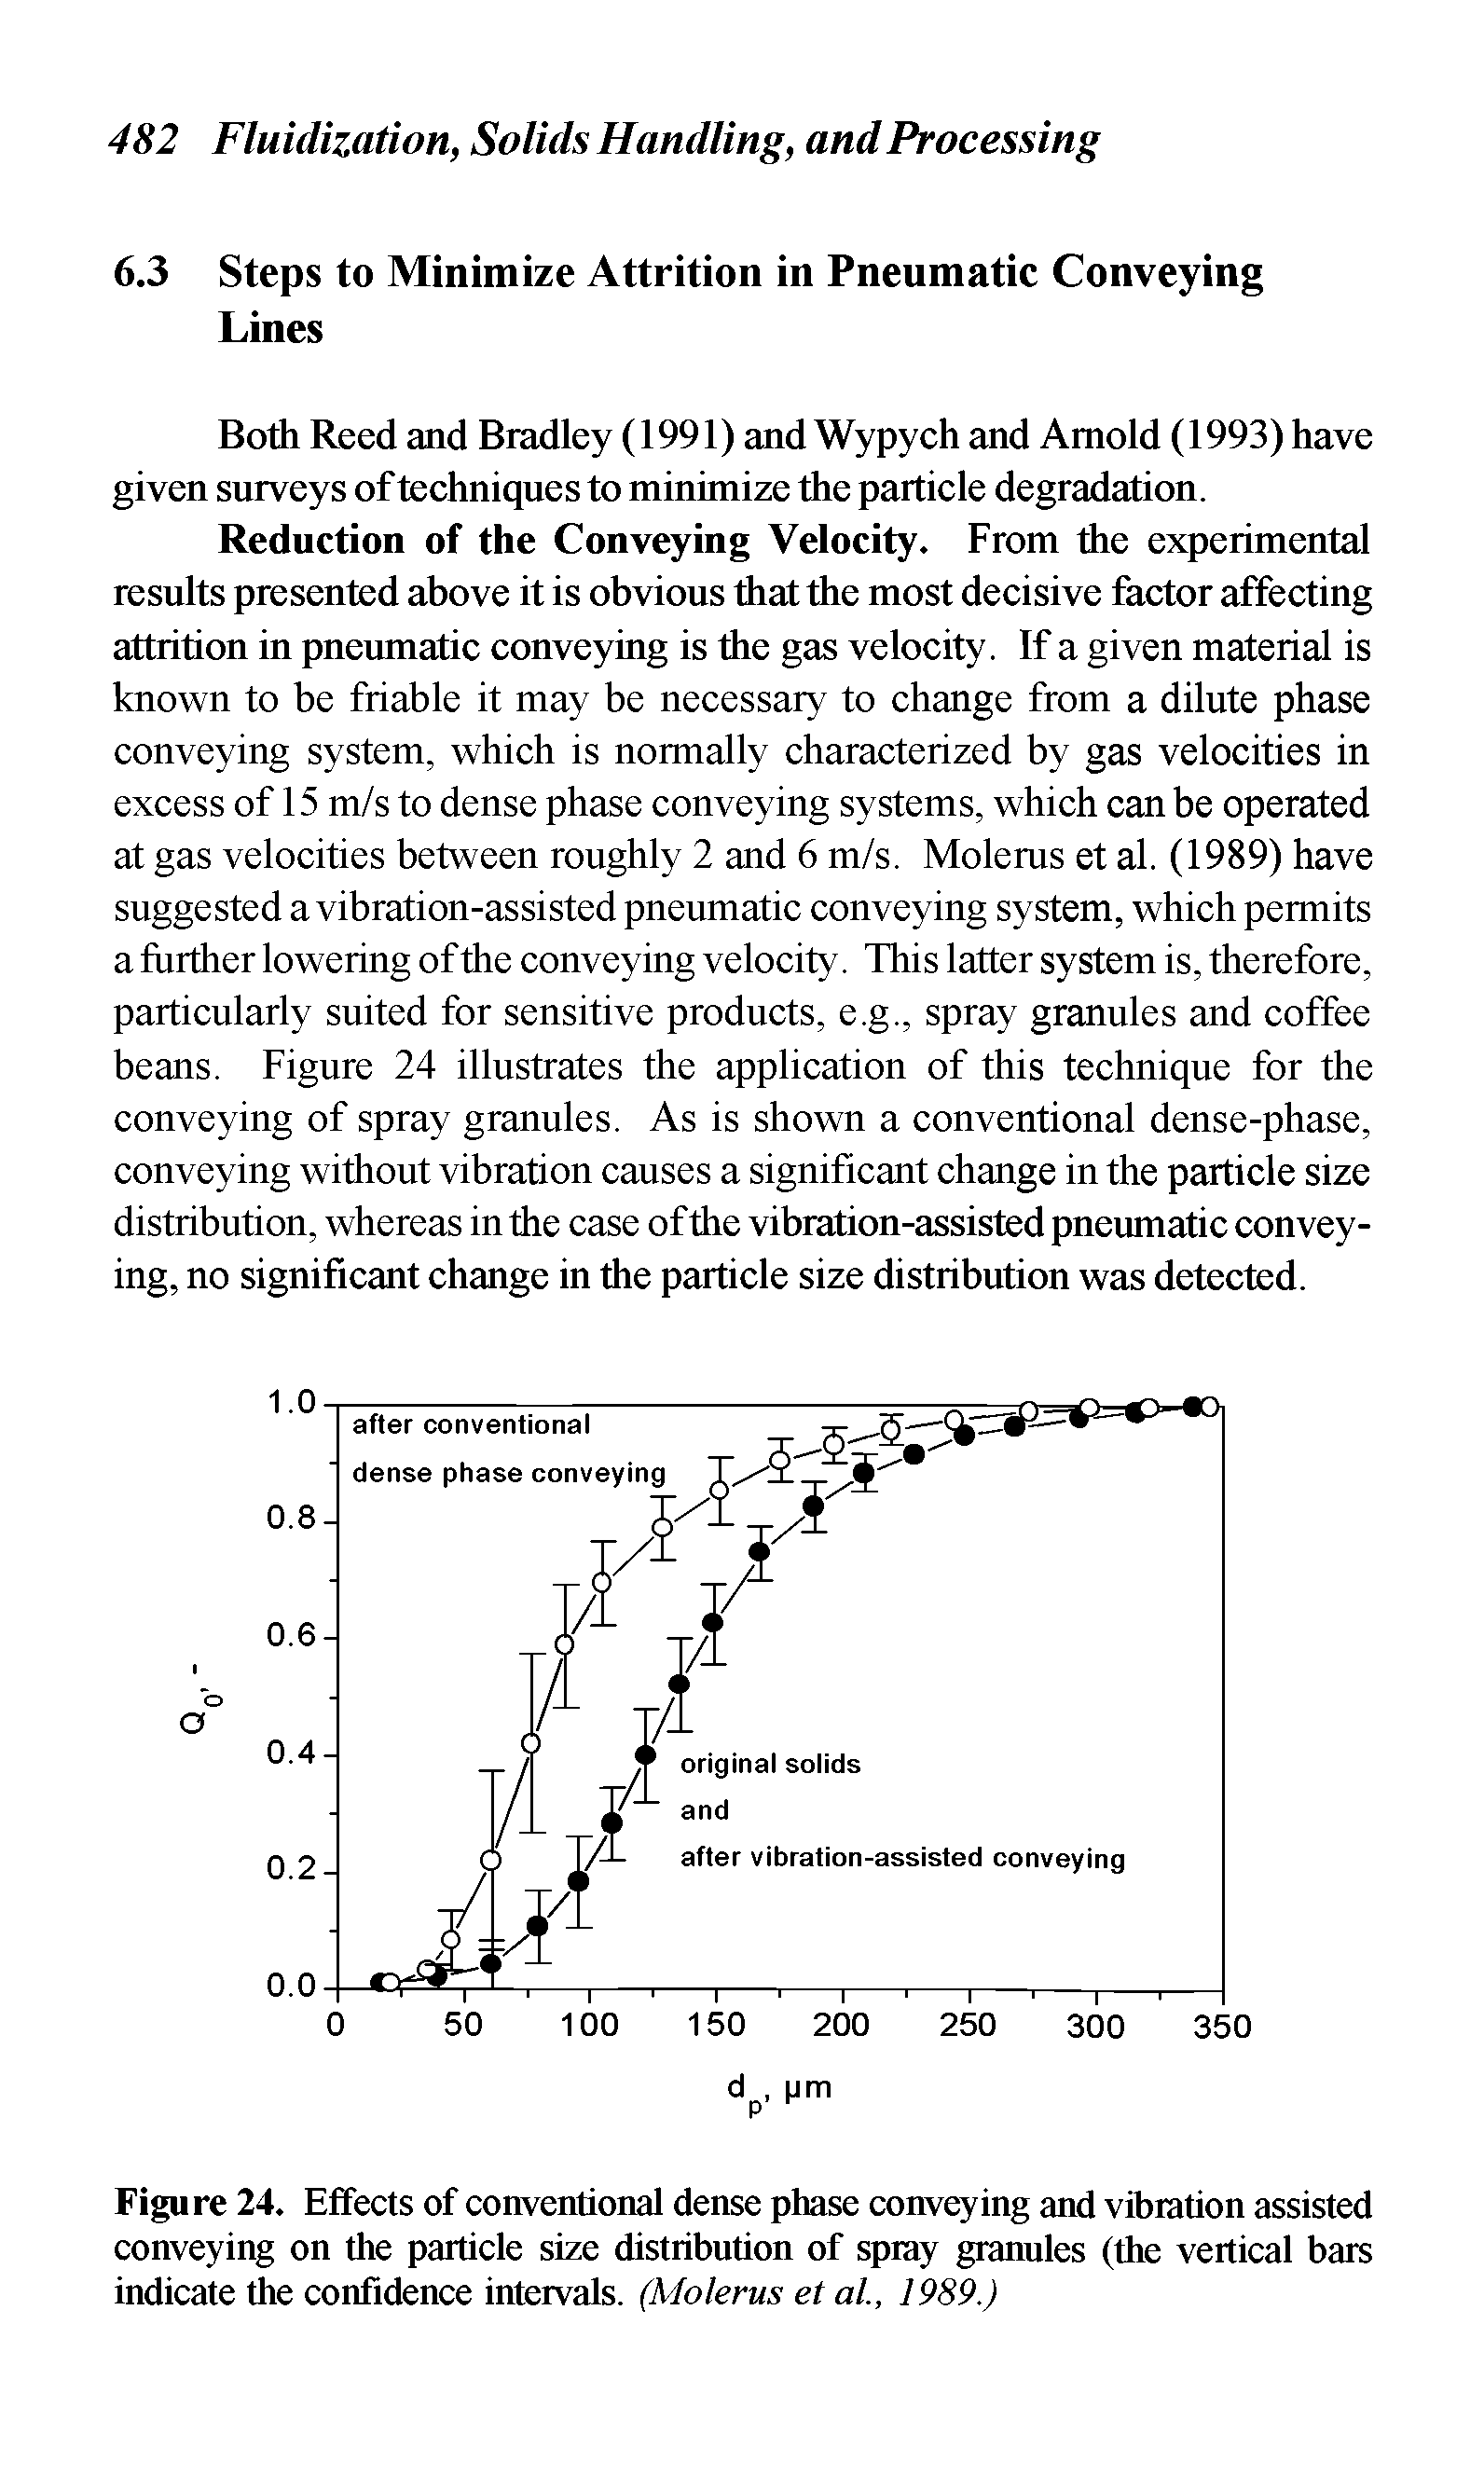 Figure 24. Effects of conventional dense phase conveying and vibration assisted conveying on the particle size distribution of spray granules (the vertical bars indicate the confidence intervals. (Molerus et al., 1989.)...